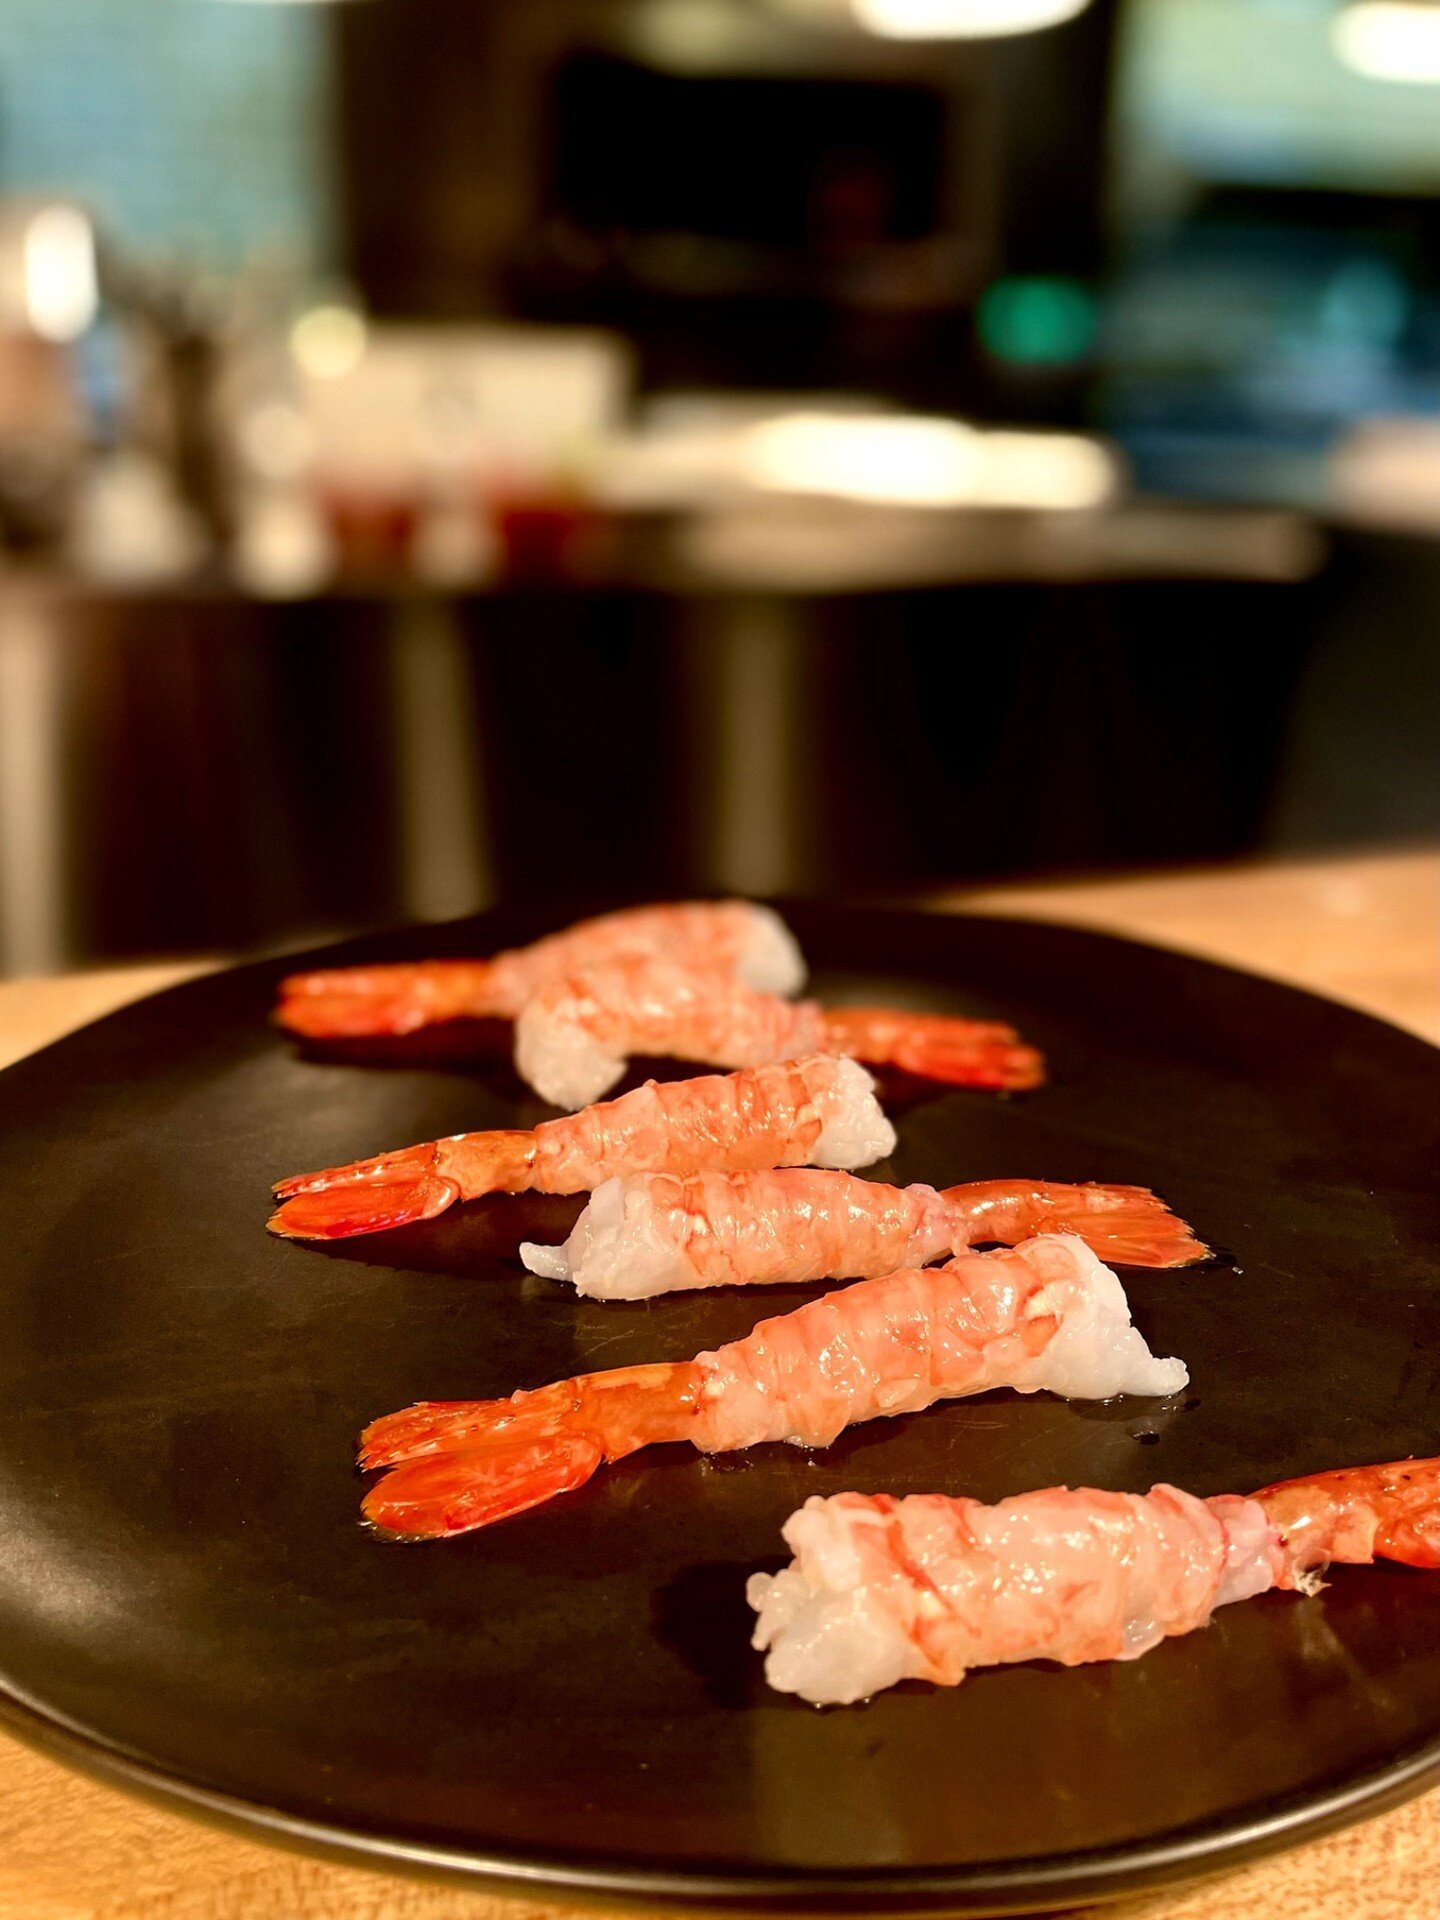 Last week we featured Fresh Alaskan Spot Prawns from Fairweather Fish. This incredible catch was so fresh it&rsquo;s Sushi Grade! 

Chef Edward was honored to craft a dish he hasn't seen since his time in New York, 15 years ago. This Spot Prawn Crudo